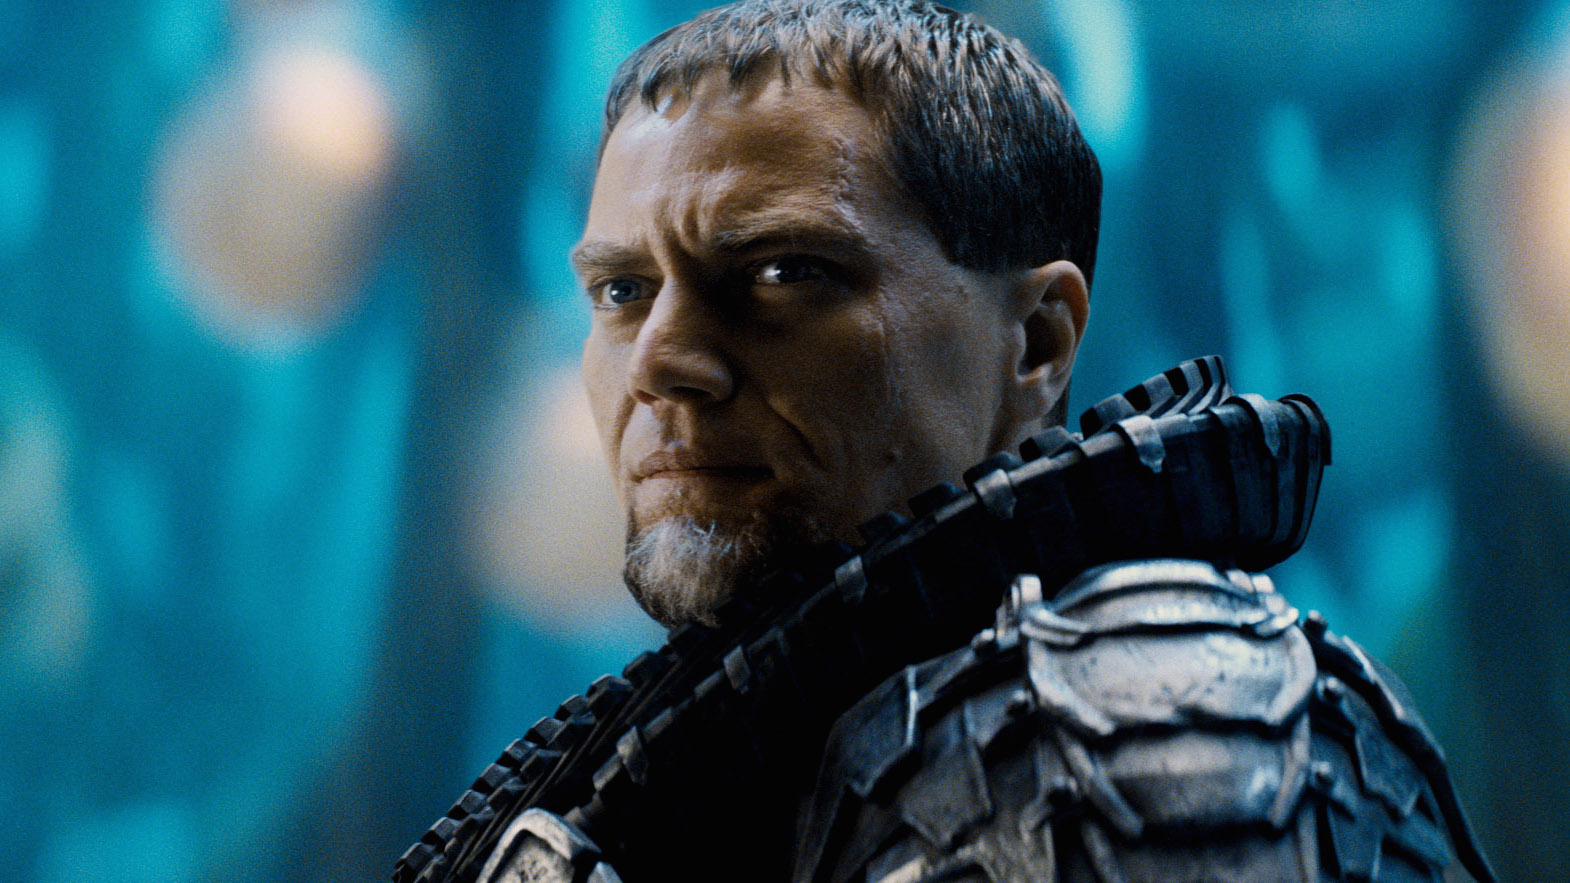 General Zod from DC Not only in the era of the Man of Steel, but General Zod is also one of the most frightening villains of all time. Zod is capable of presenting an uphill challenge to the most powerful superheroes around. After releasing from the Phantom Zone, he tried to take control of Earth. He turned into his most dangerous self and decided to kill every other human being on the planet. Powerful supervillains